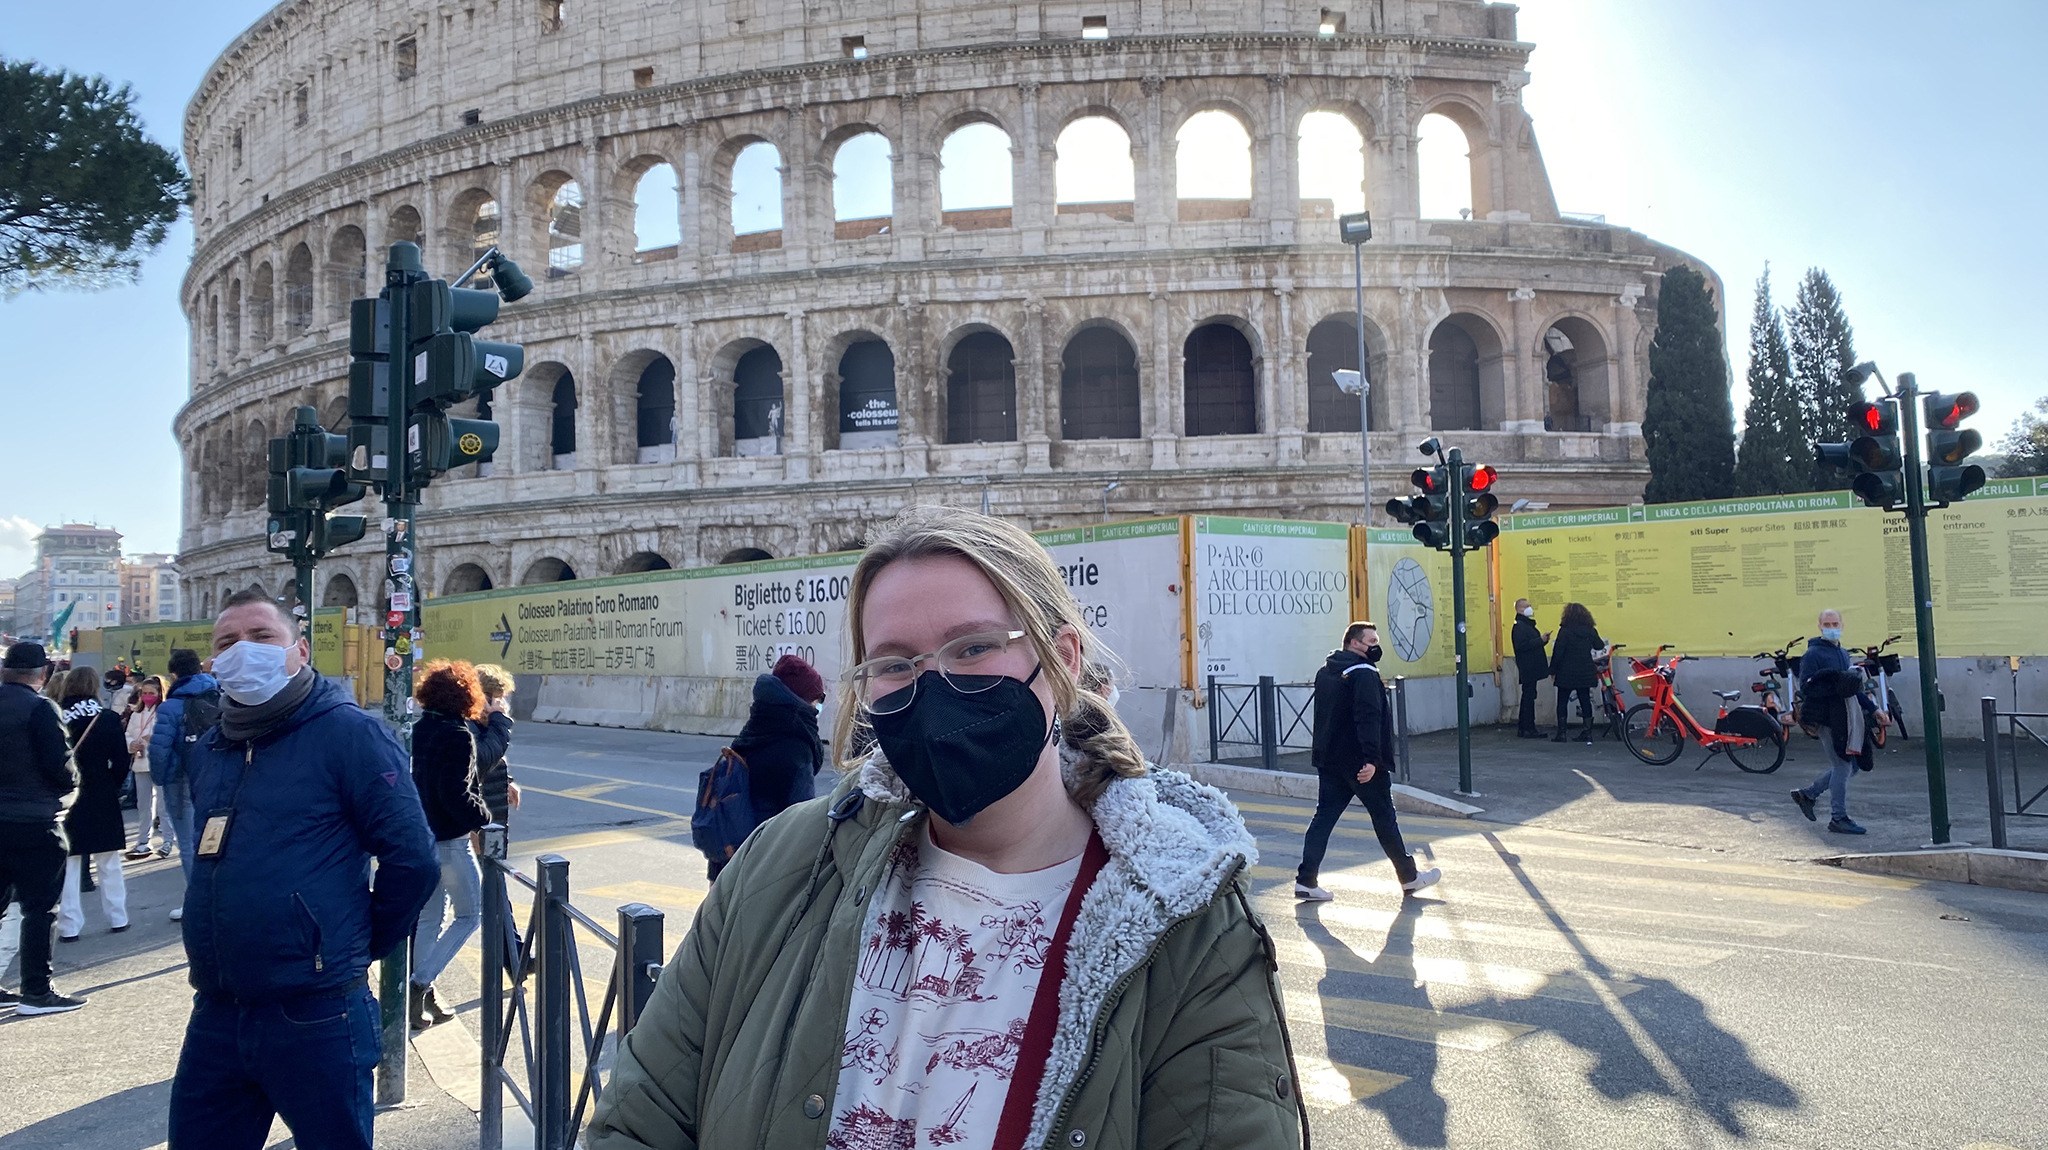 UM honors student and Truman Scholar finalist Madeleine Dotson visits the Colosseum in Rome while studying classics in Italy. Submitted photo